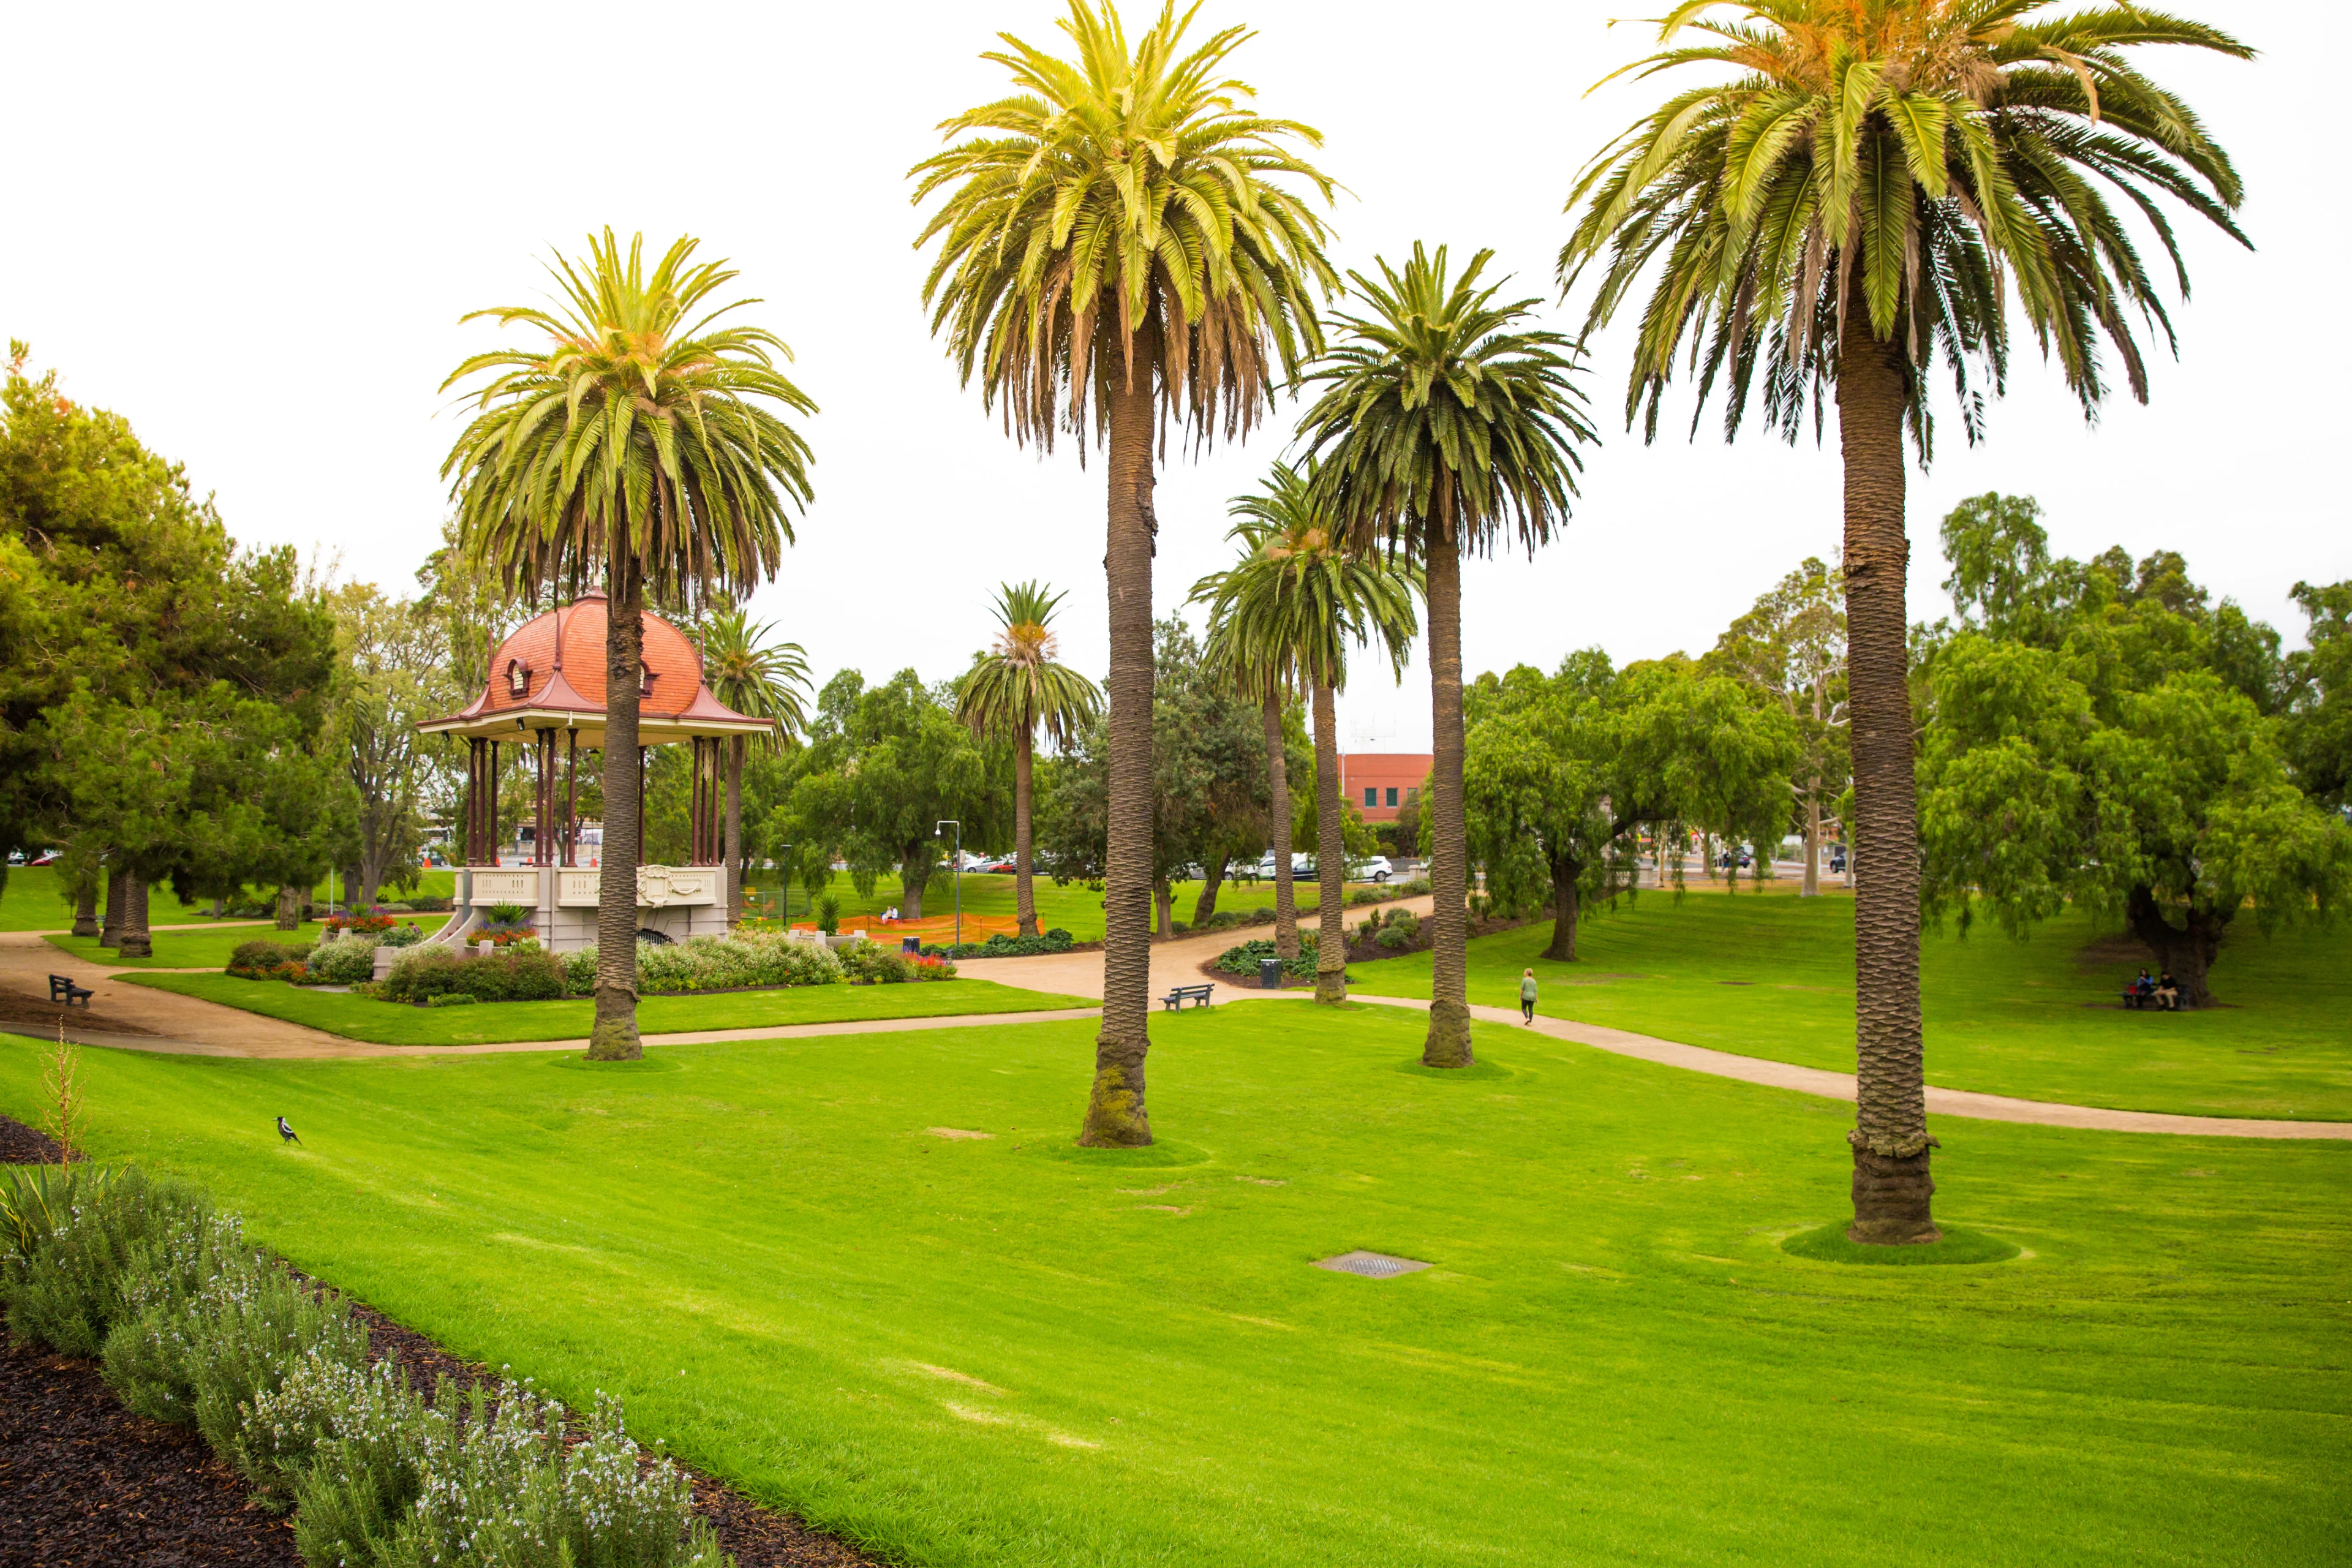 Gardens and Bandstand in Johnstone Park, Geelong, Victoria